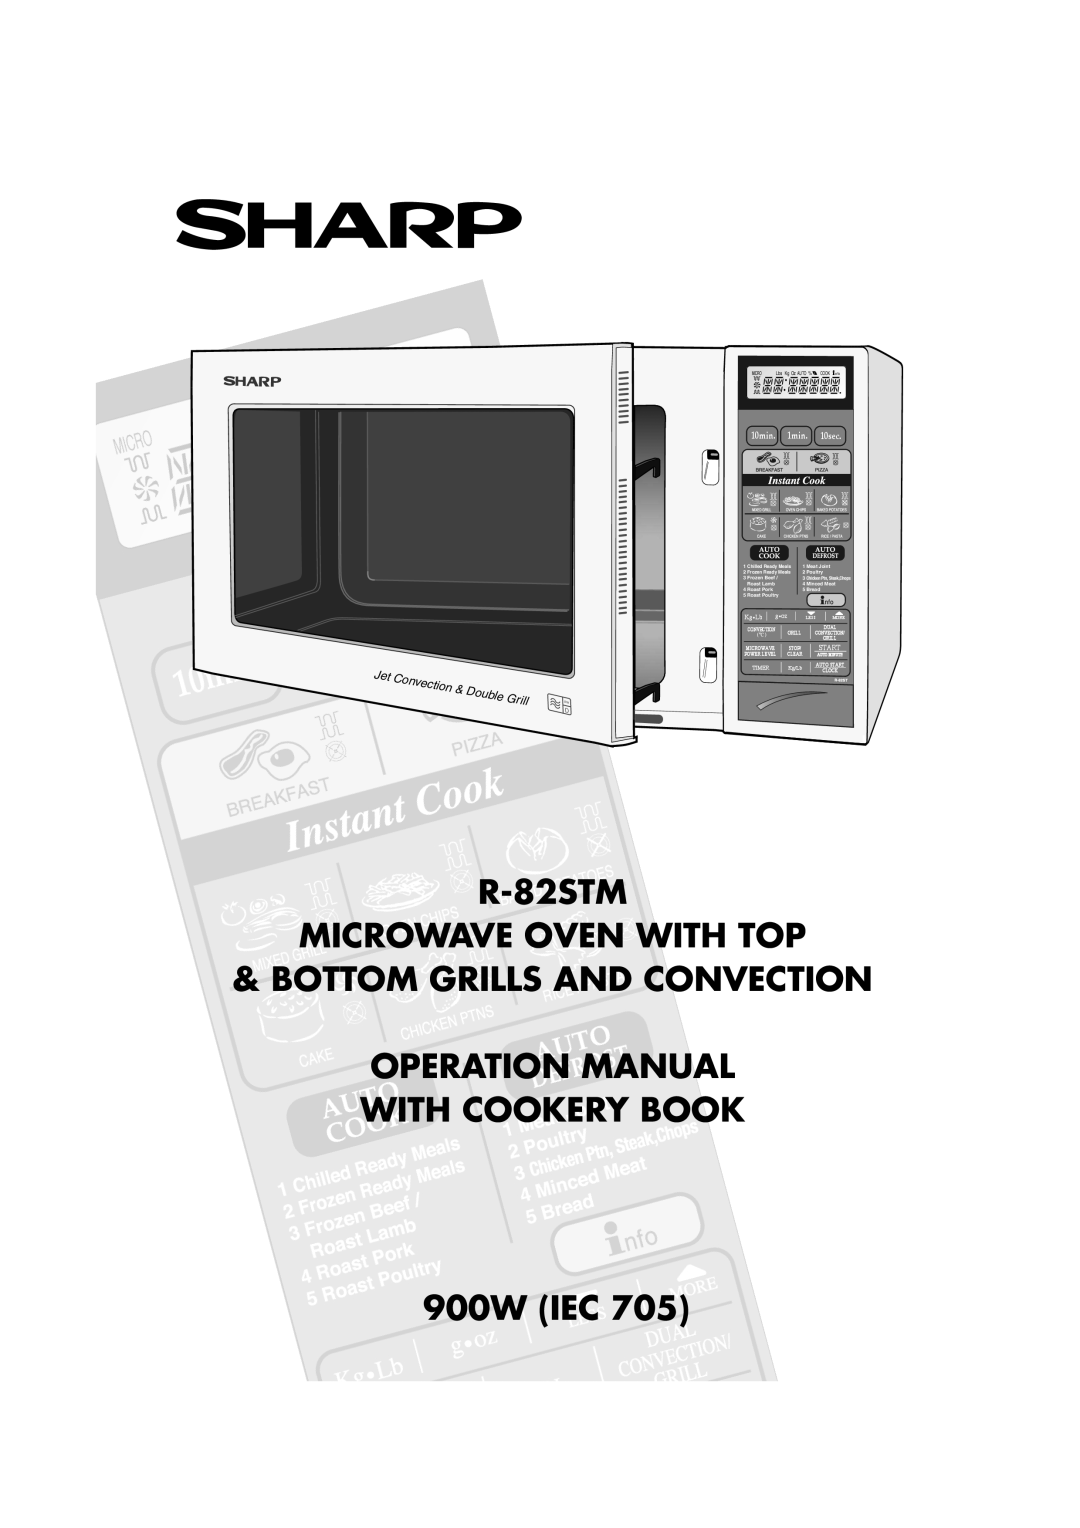 Sharp manual R-82STM MICROWAVE OVEN WITH TOP BOTTOM GRILLS AND CONVECTION, 900W IEC, Jet Convection & Double Grill 